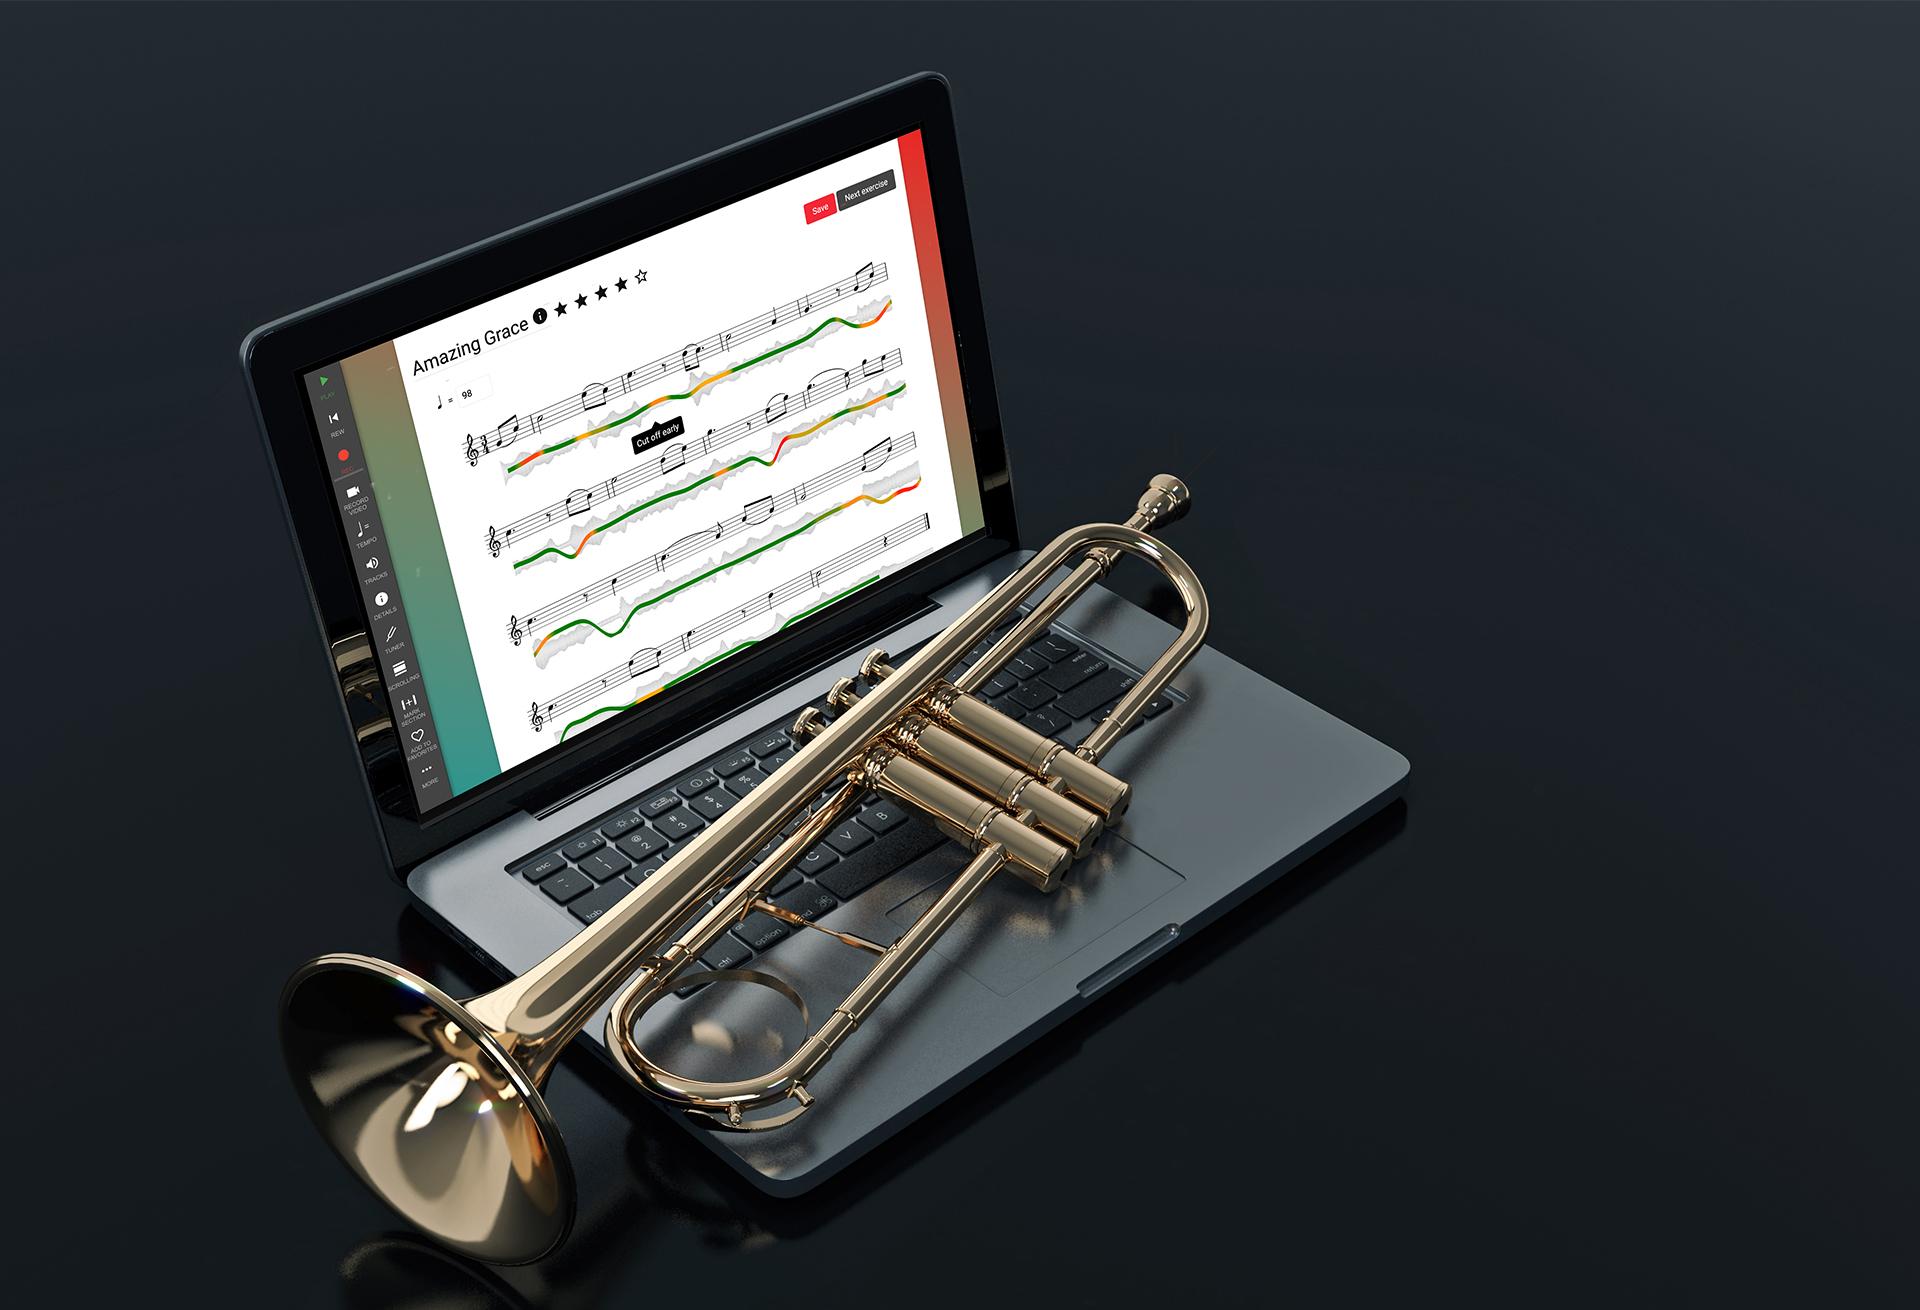 Laptop computer on dark grey background. A trumpet is laying across the keyboard and PracticeFirst software is displayed on the laptop screen.